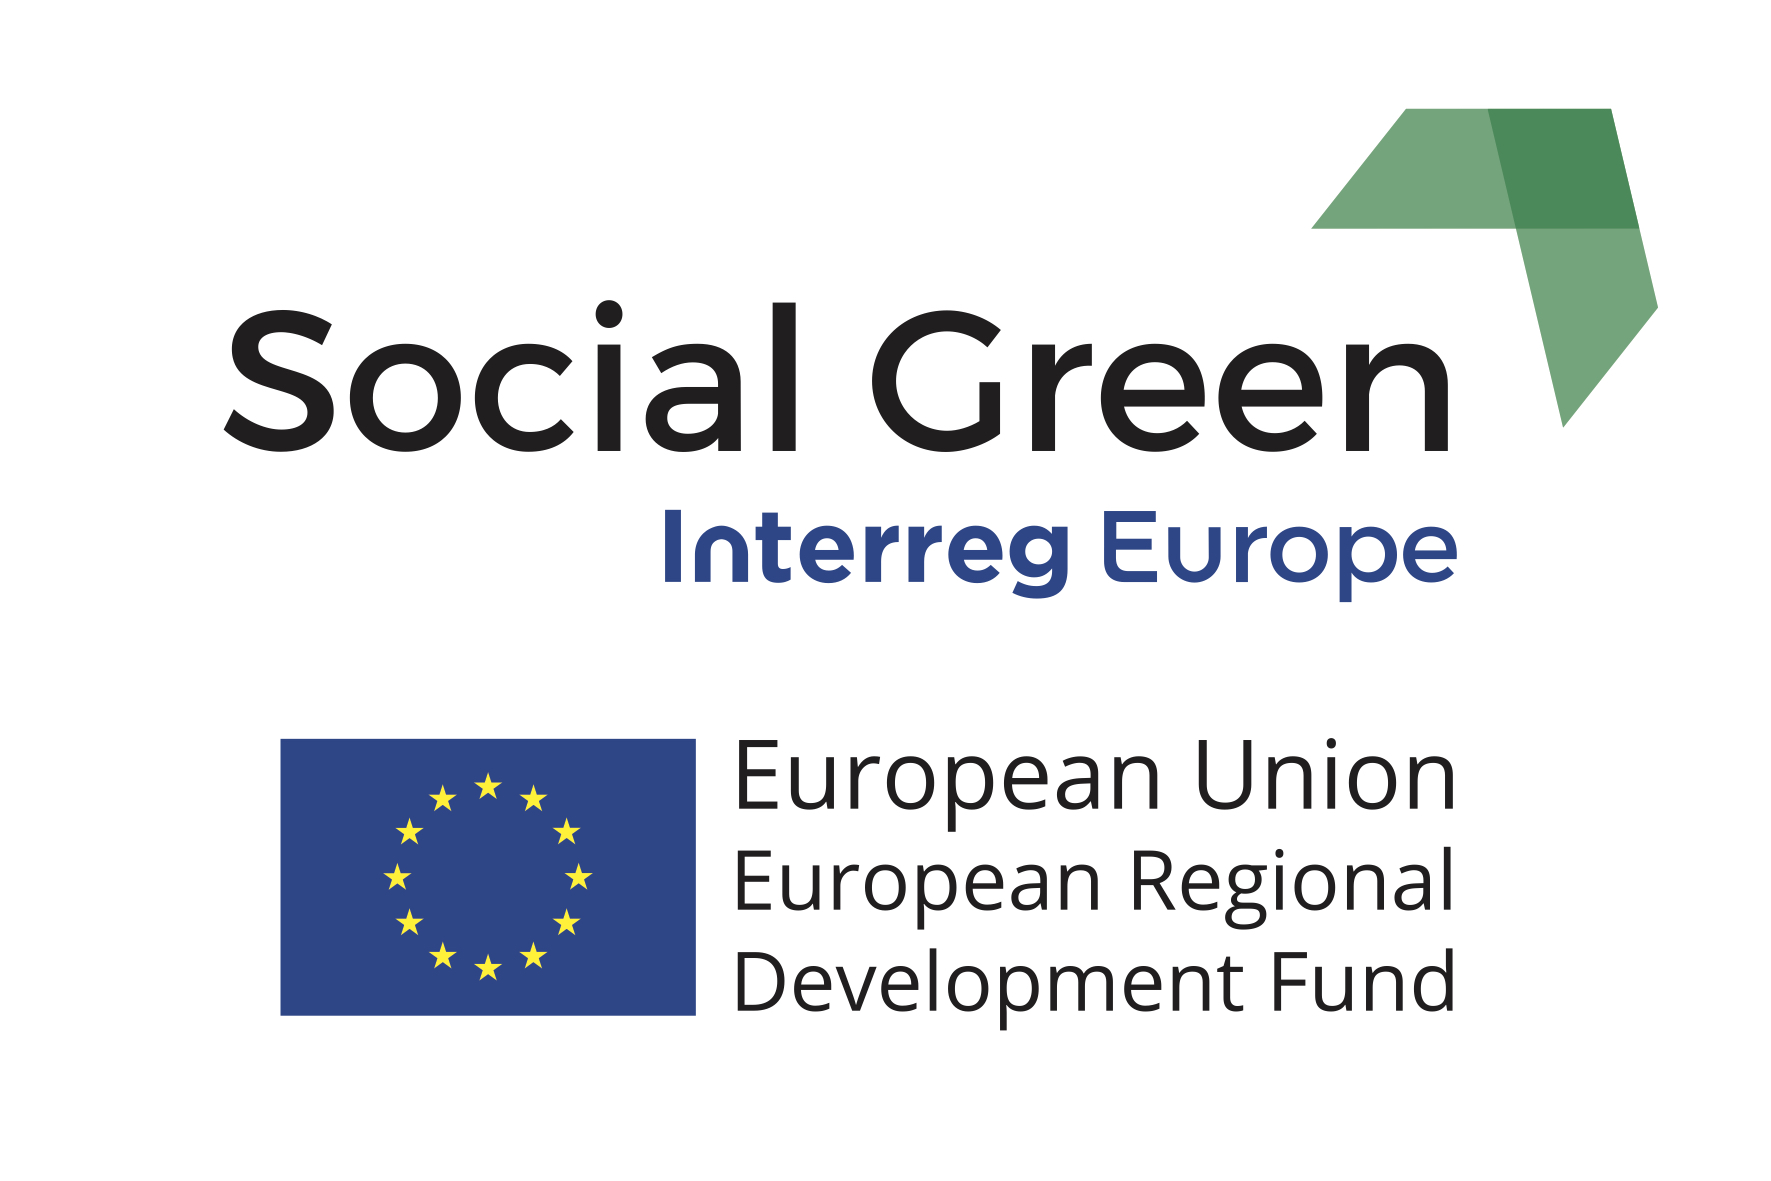 What is Social Green?